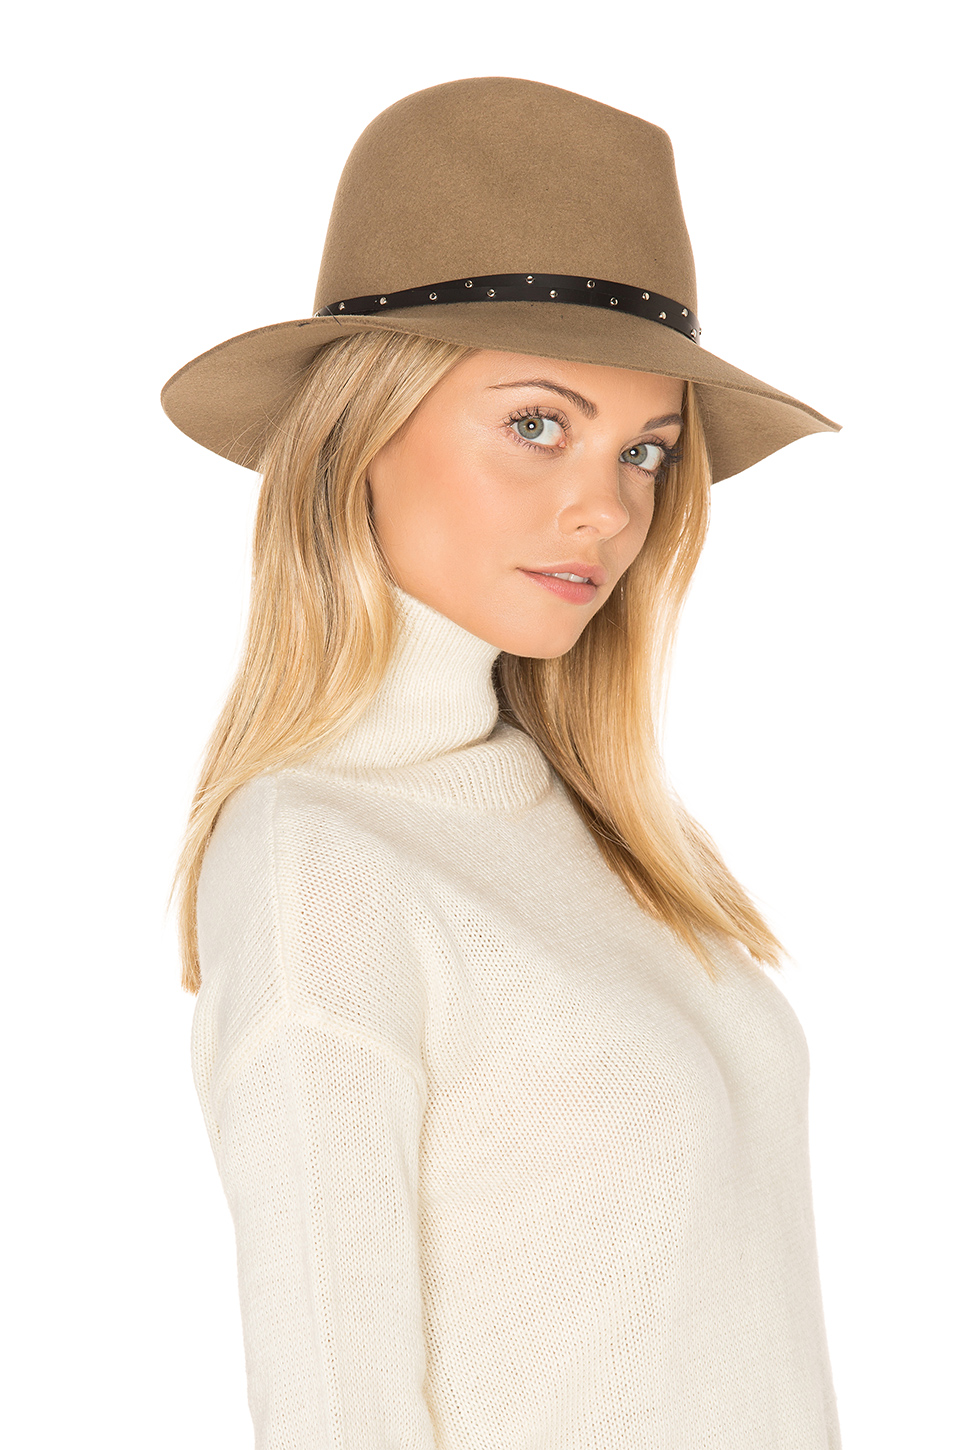 http://www.revolve.com/rag-bone-floppy-brim-fedora/dp/RGBR-WH25/?d=Womens&page=1&lc=23&itrownum=8&itcurrpage=1&itview=01